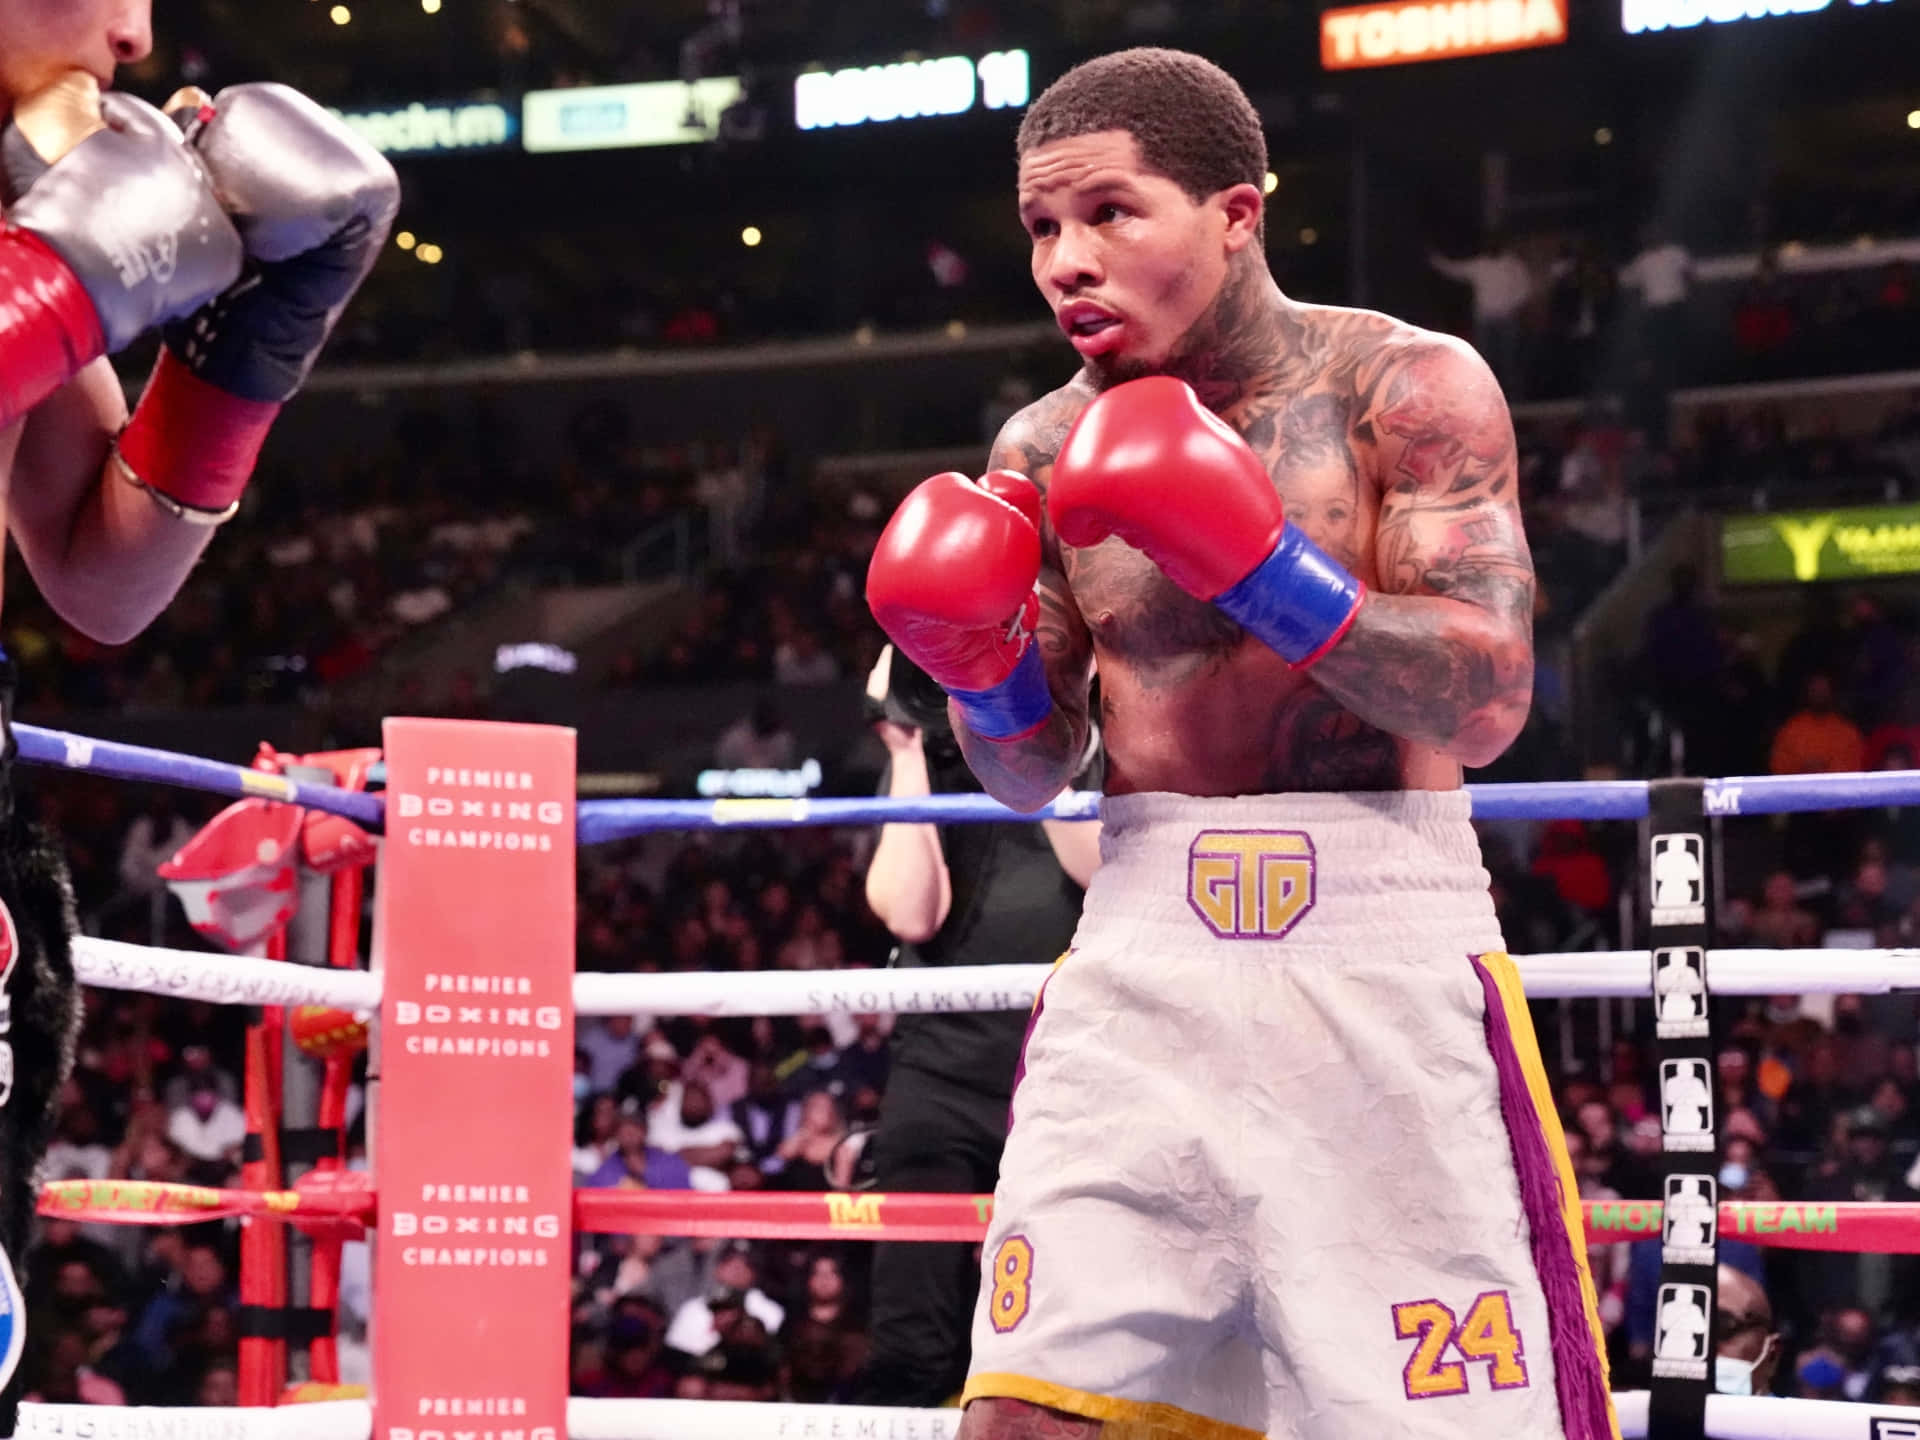 American professional boxer Gervonta Davis challenges opponents in the ring Wallpaper